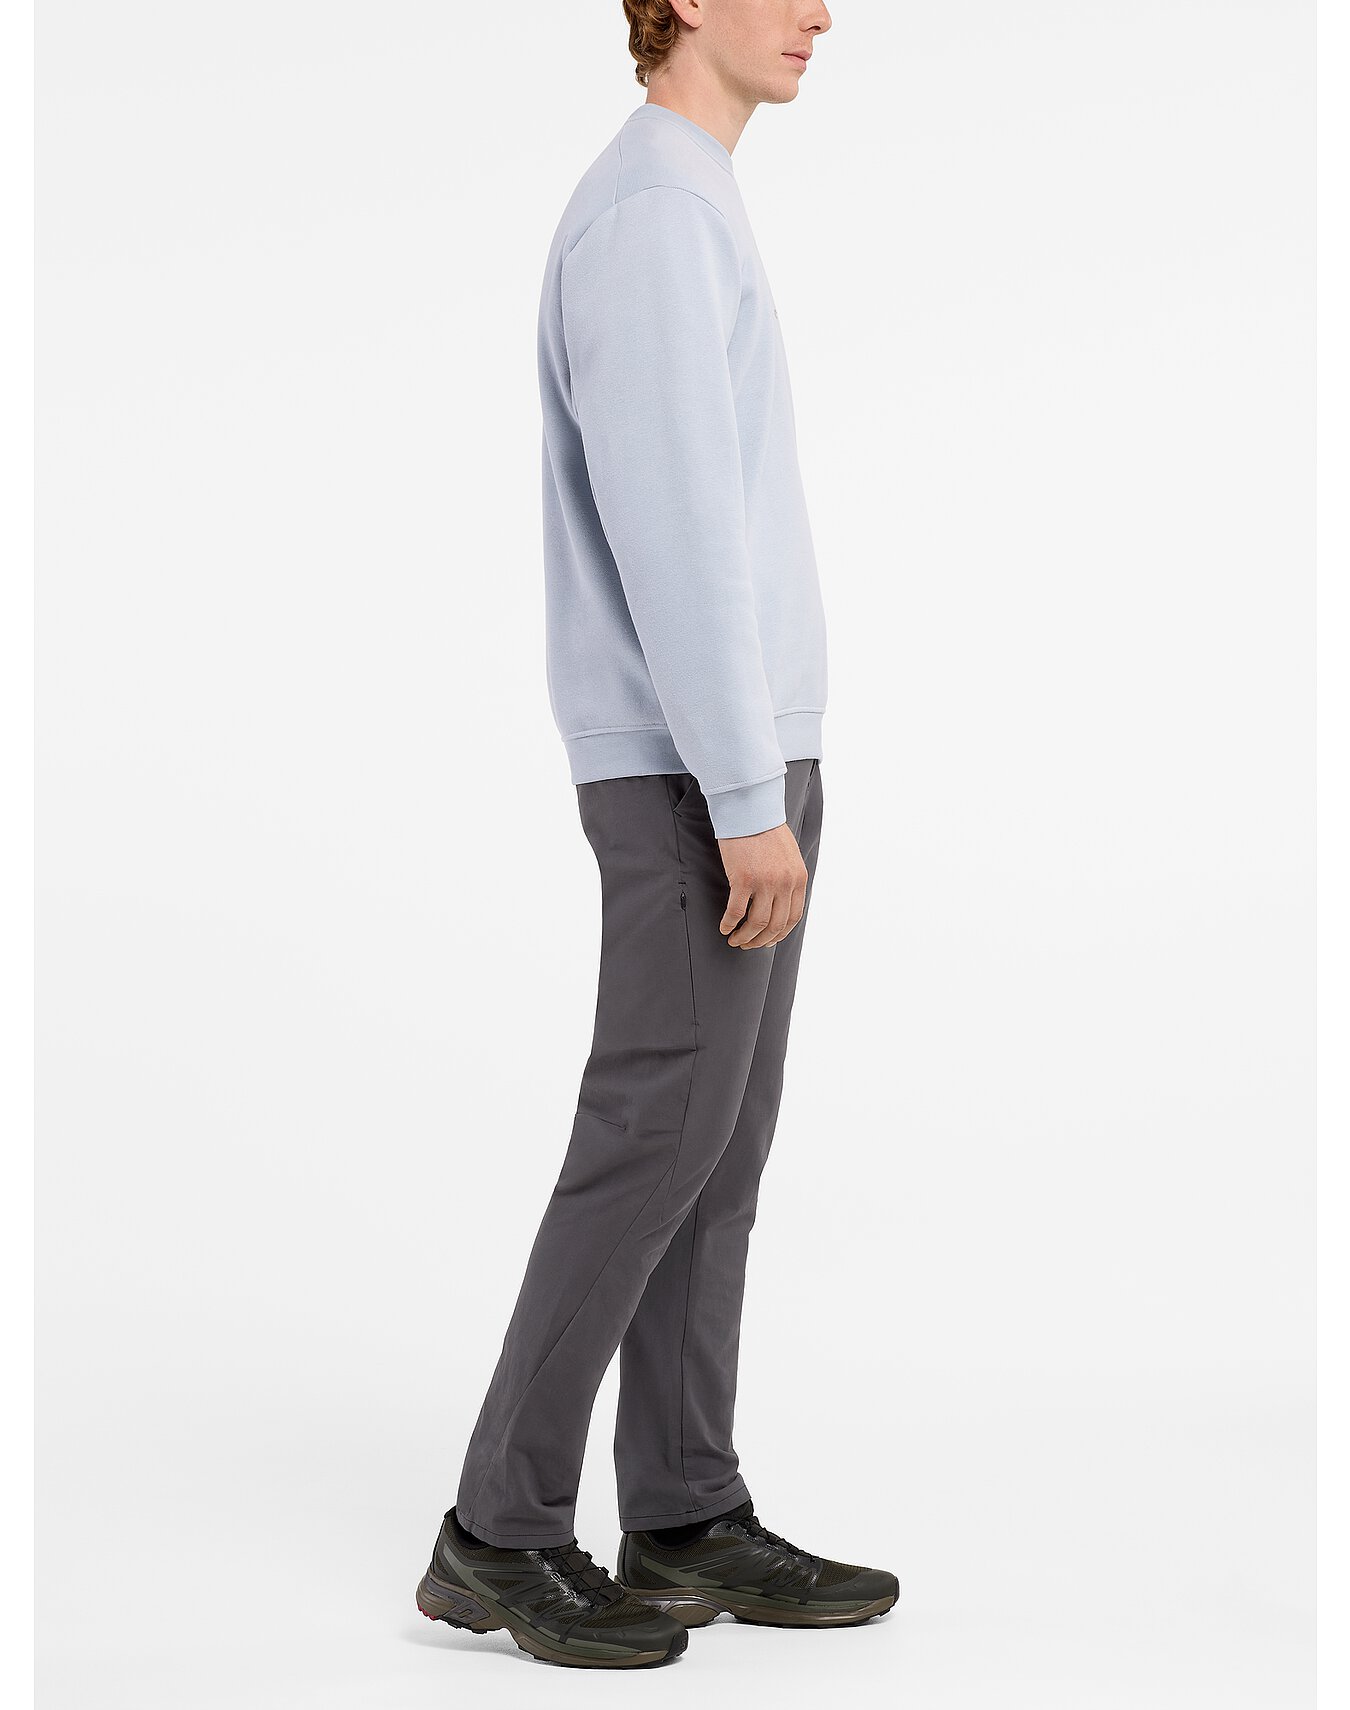 Atlin Chino Pant Men's | Arc'teryx Outlet